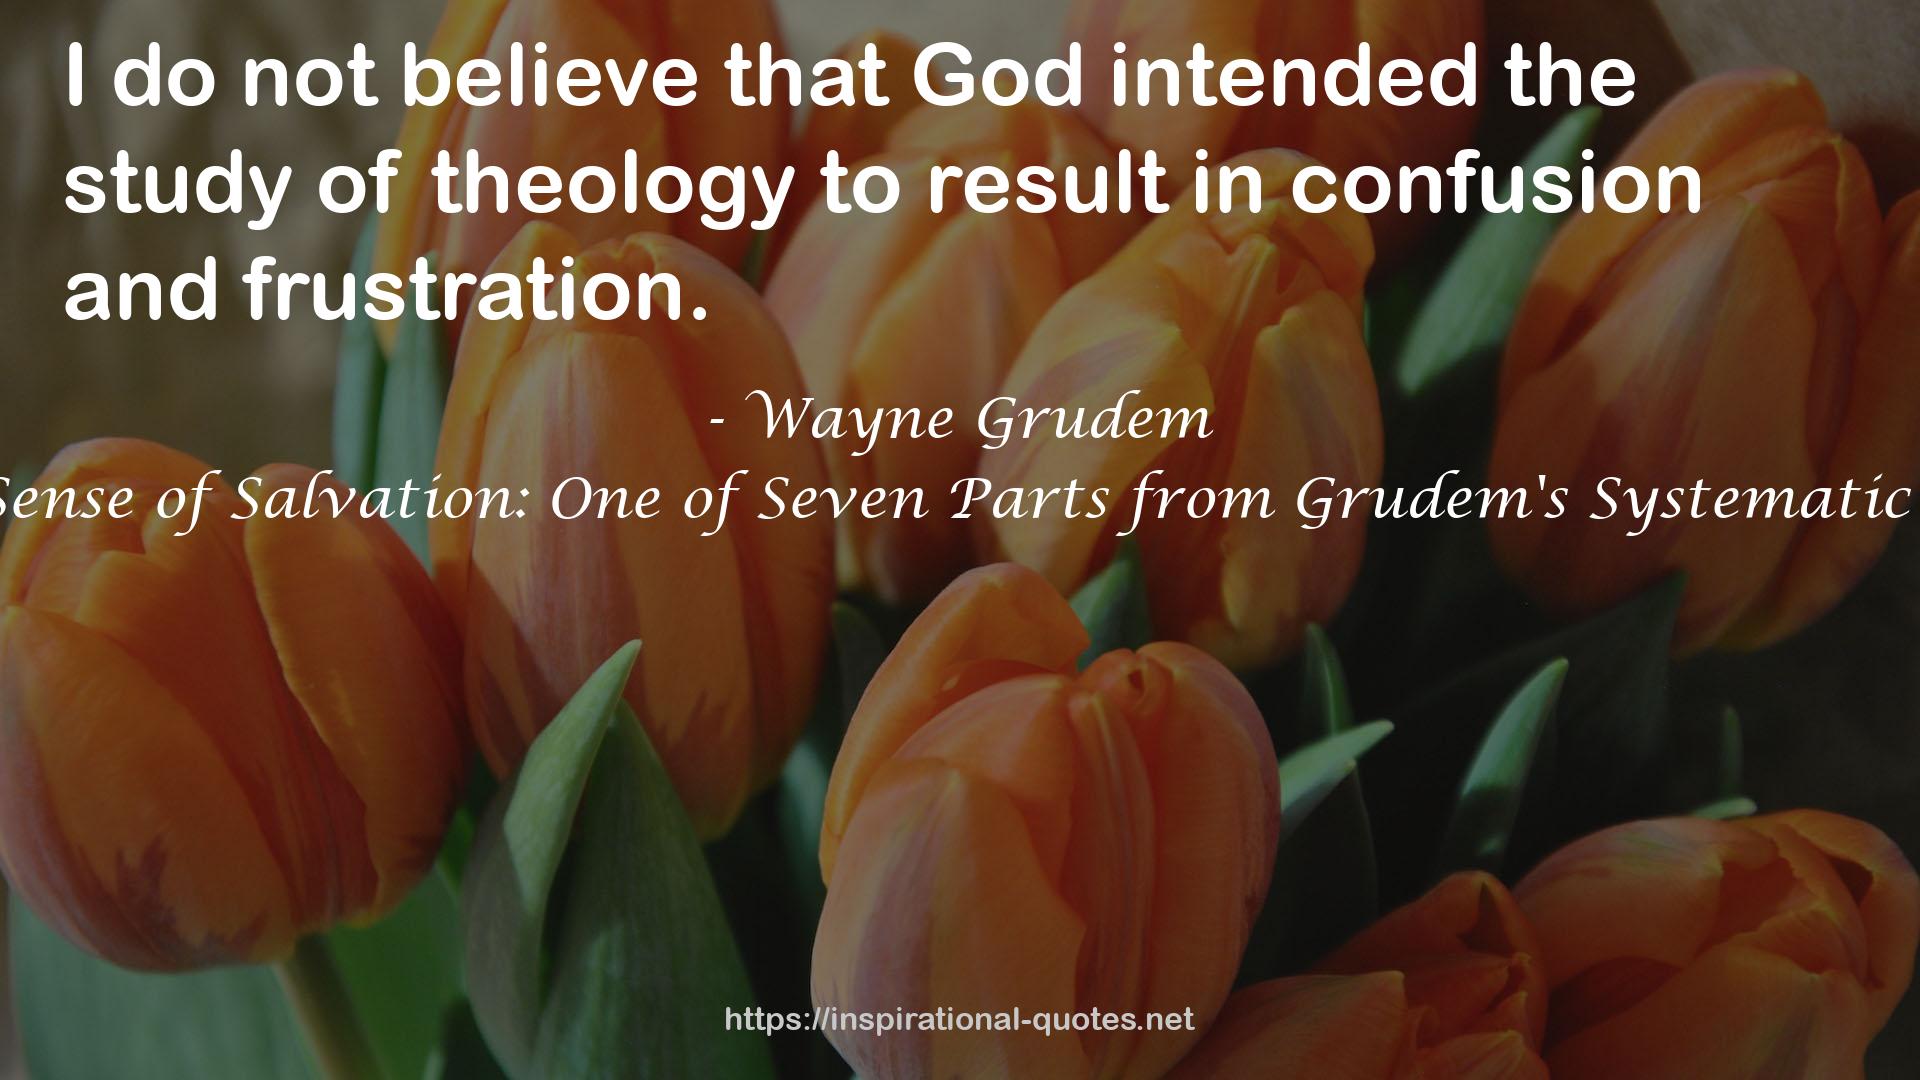 Making Sense of Salvation: One of Seven Parts from Grudem's Systematic Theology QUOTES